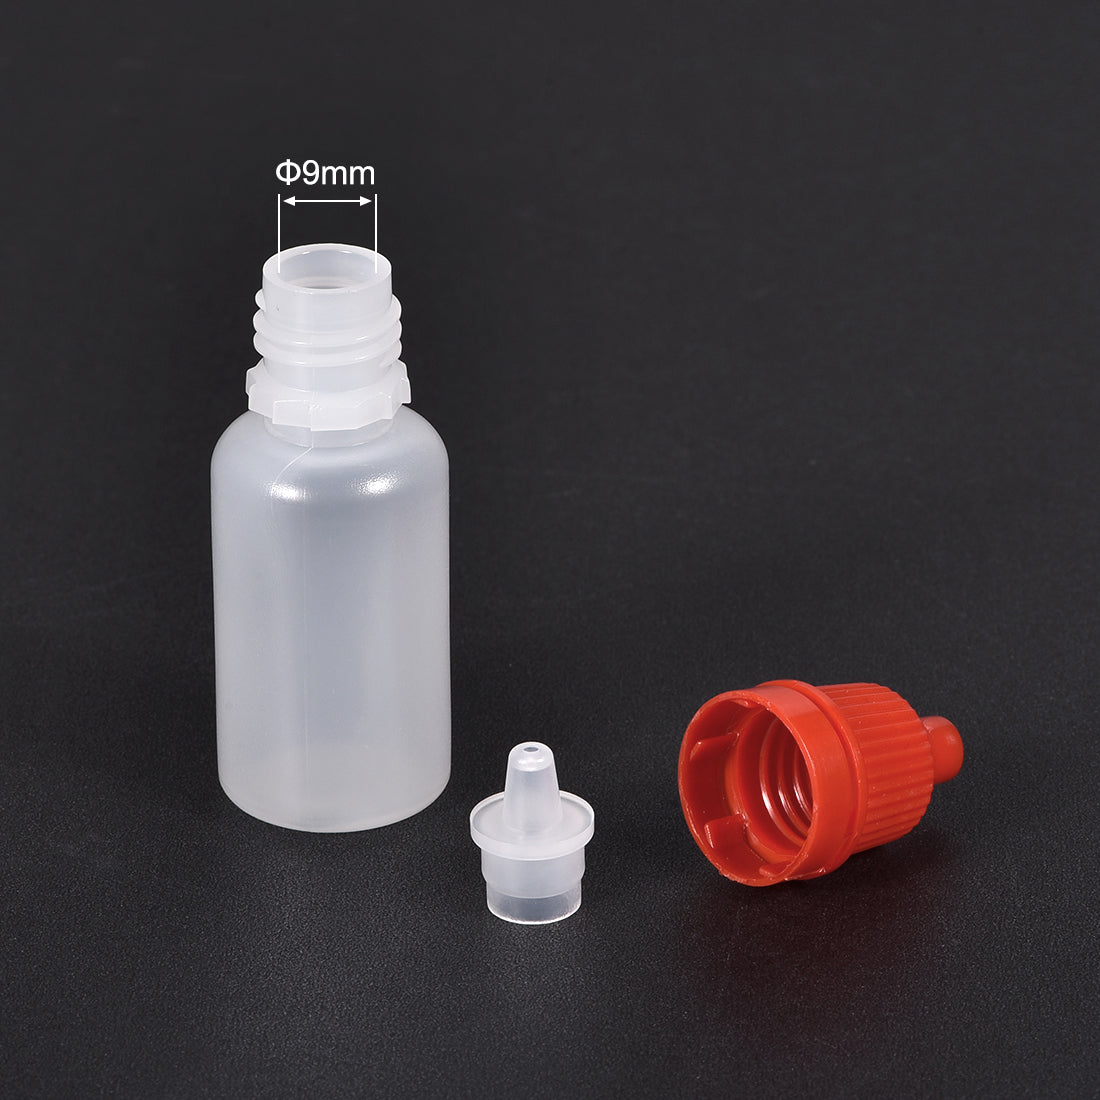 uxcell Uxcell 10ml/0.34 oz Empty Squeezable Dropper Bottle Red 10pcs